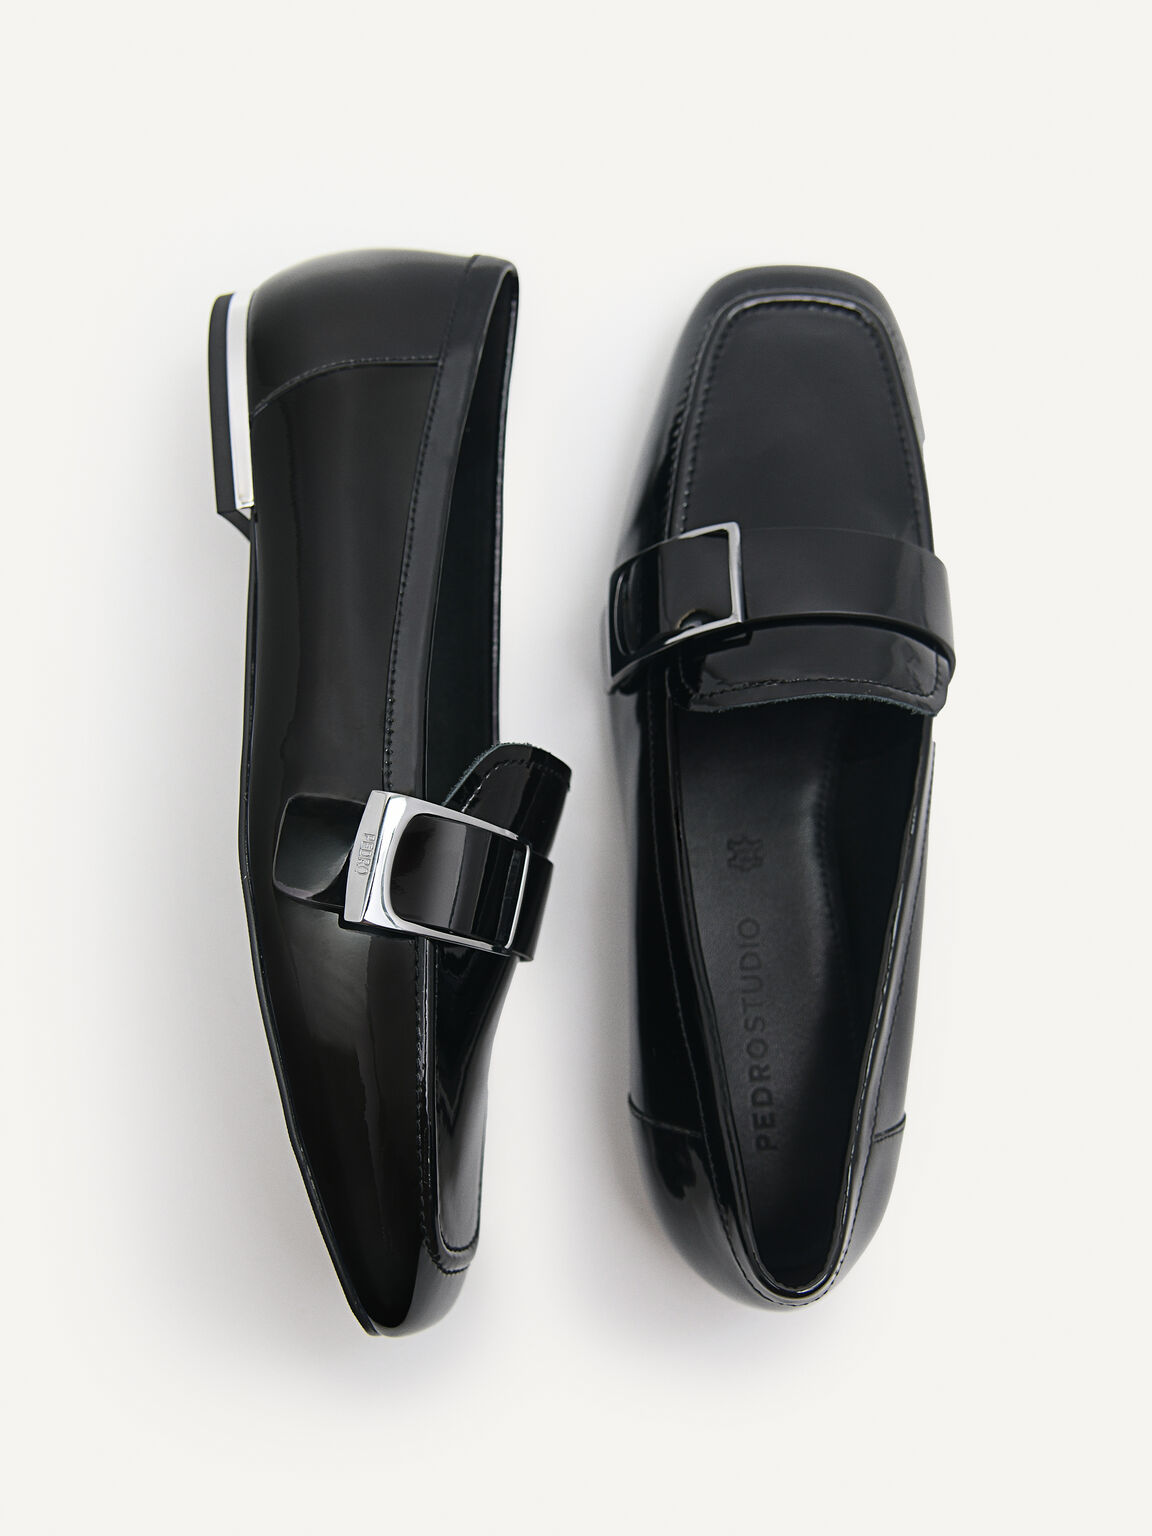 Patent Leather Loafers, Black, hi-res